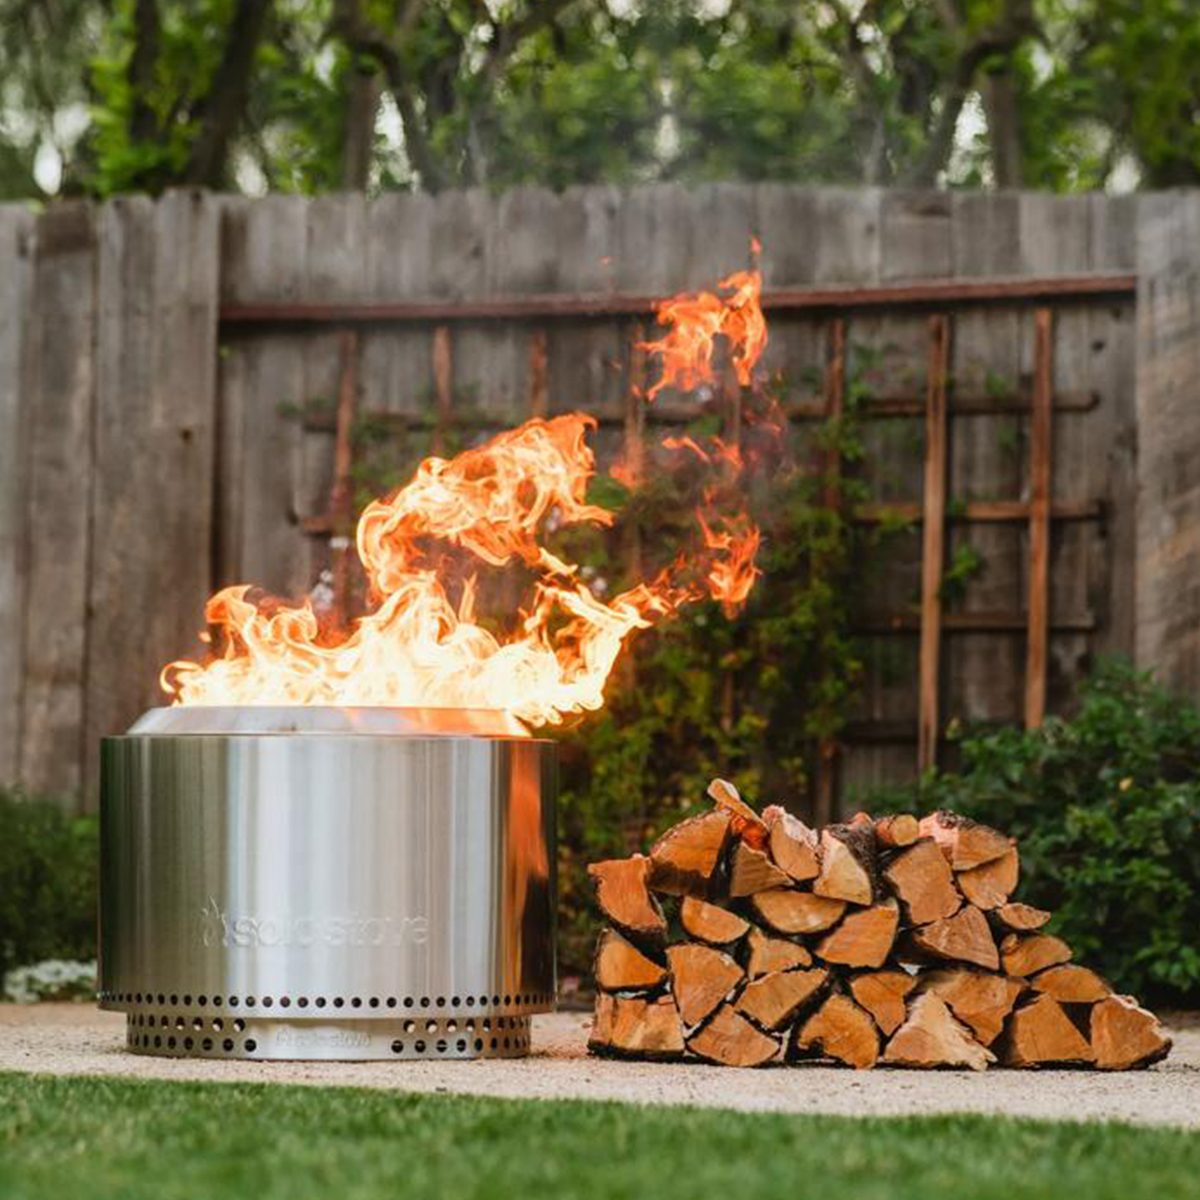 The Best Fire Pit Accessories in 2023 - Wood-Burning Fire Pit Accessories